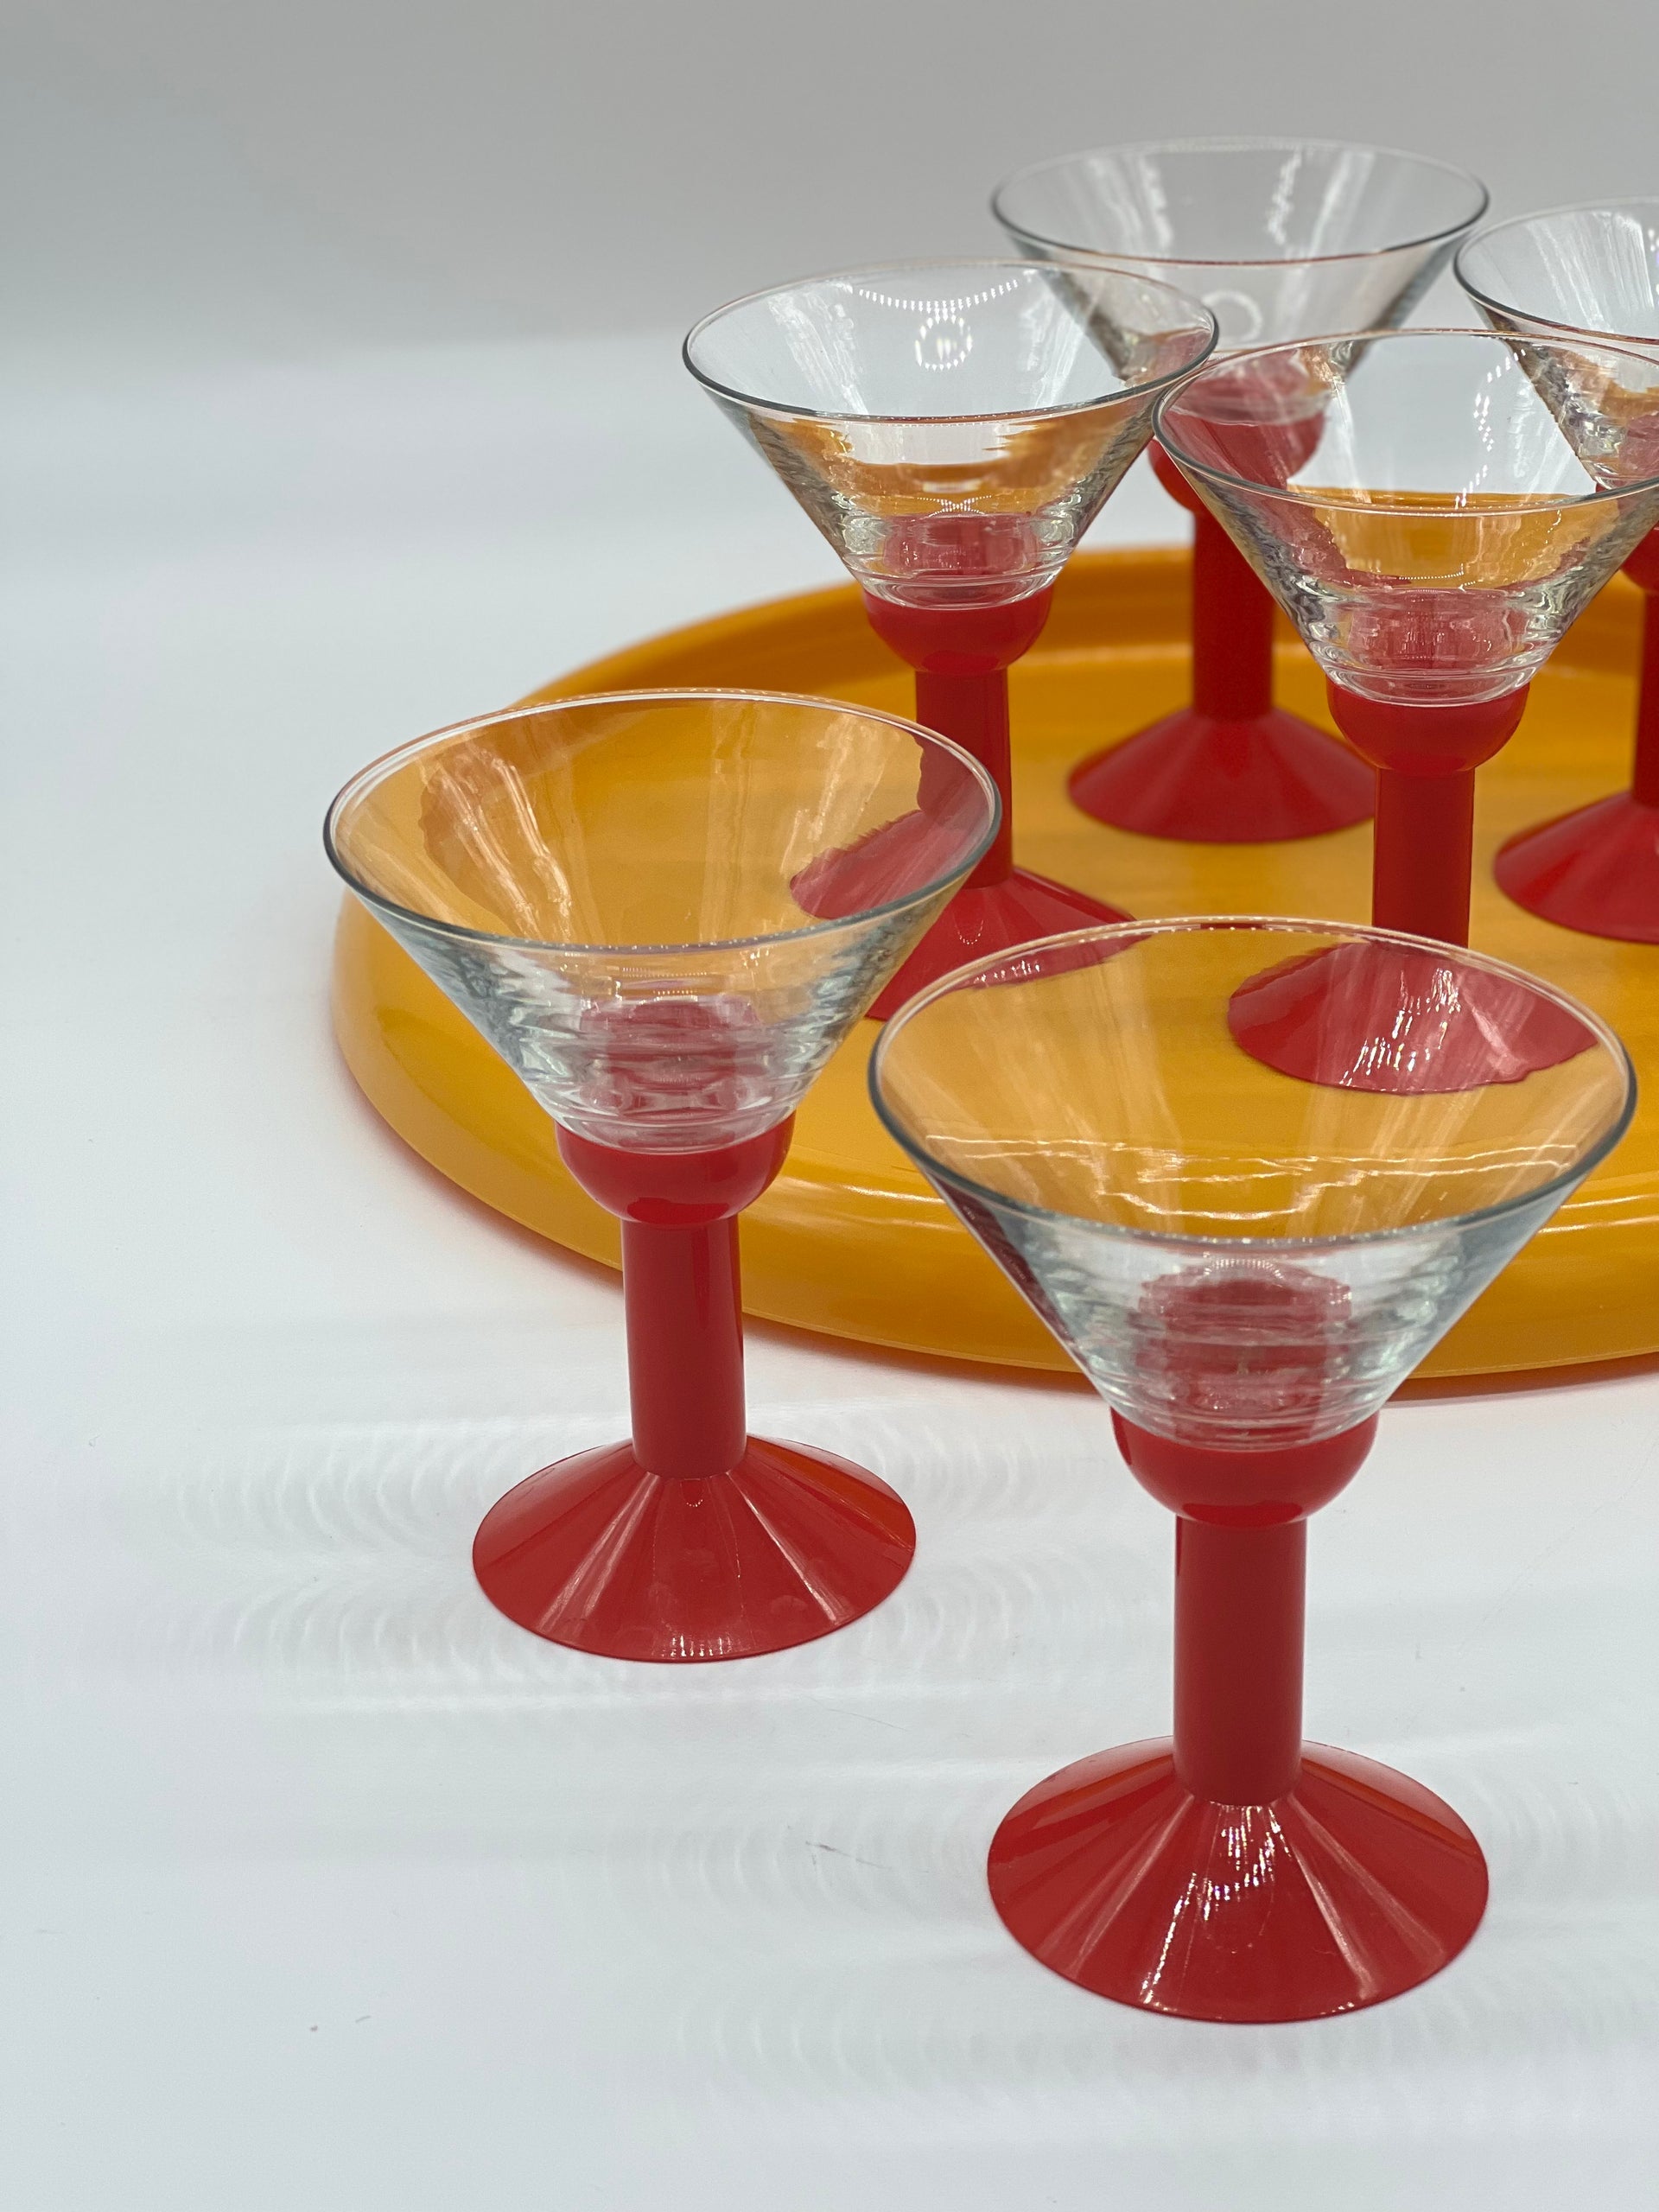 Pier 1 Murano Style Martini Glasses and Pitcher Matching Set of 7 Vintage  Red Orange Handblown Cocktail Glasses 90s Drinkware 